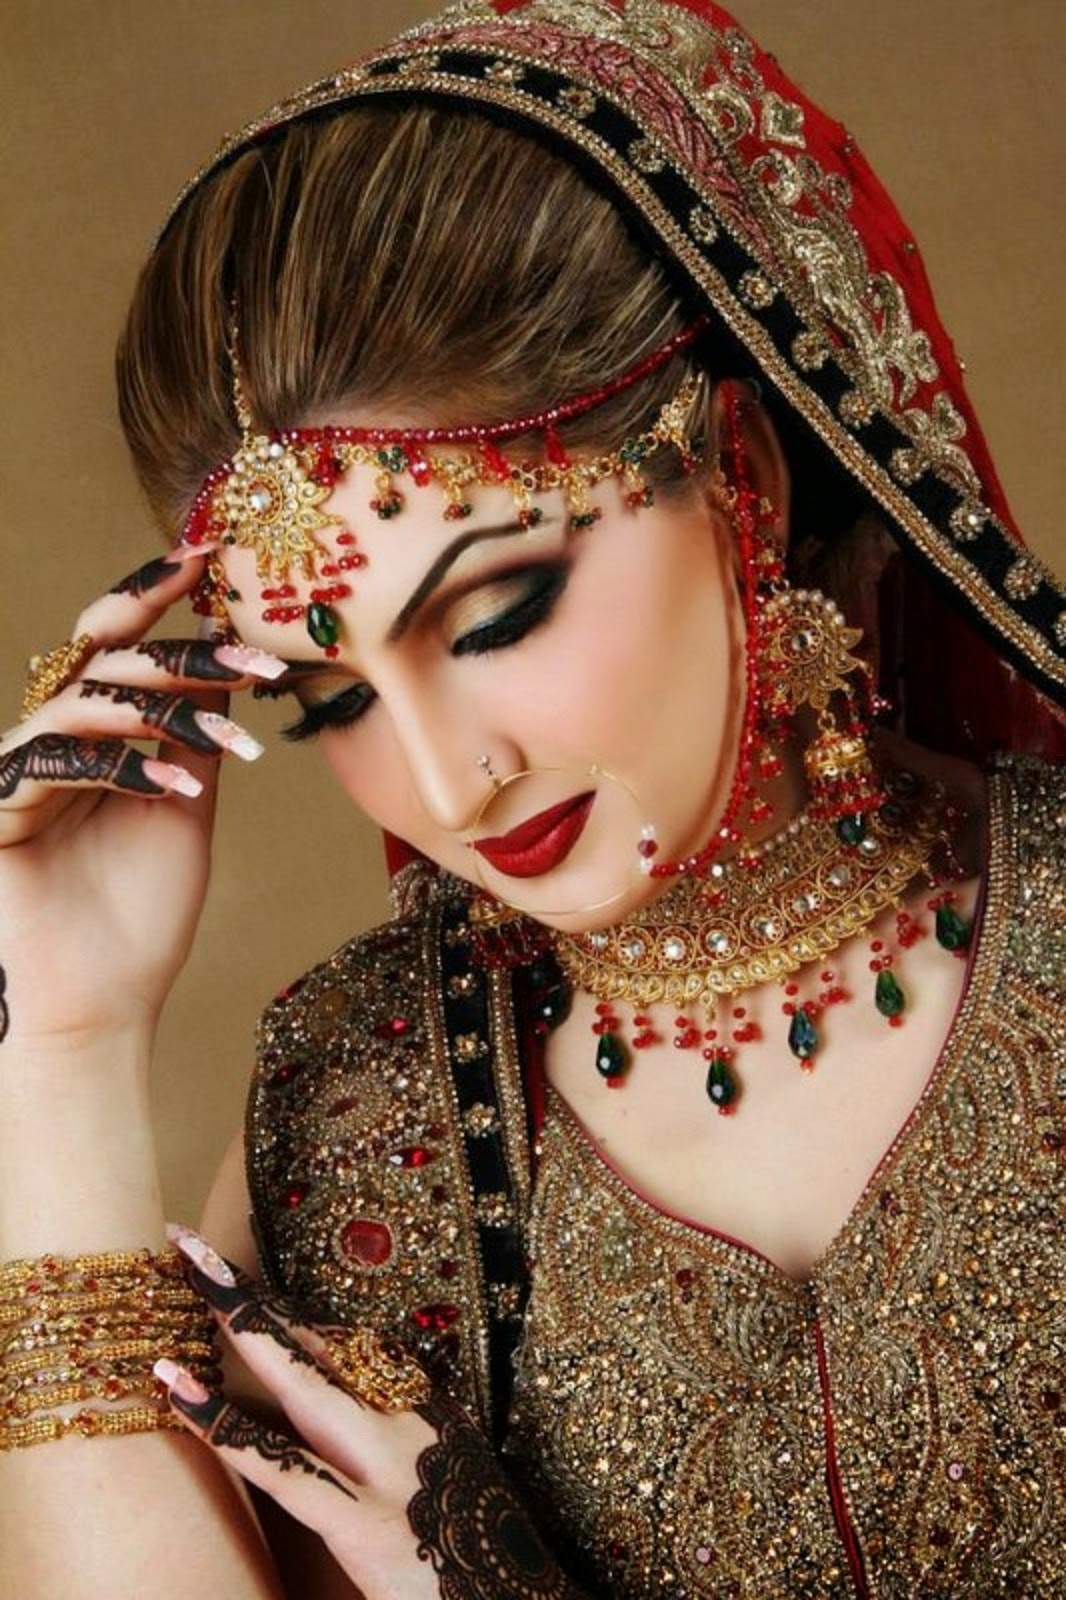 New Latest Bride Make up Beauty Tips For Bridal Wallpapers Free Download